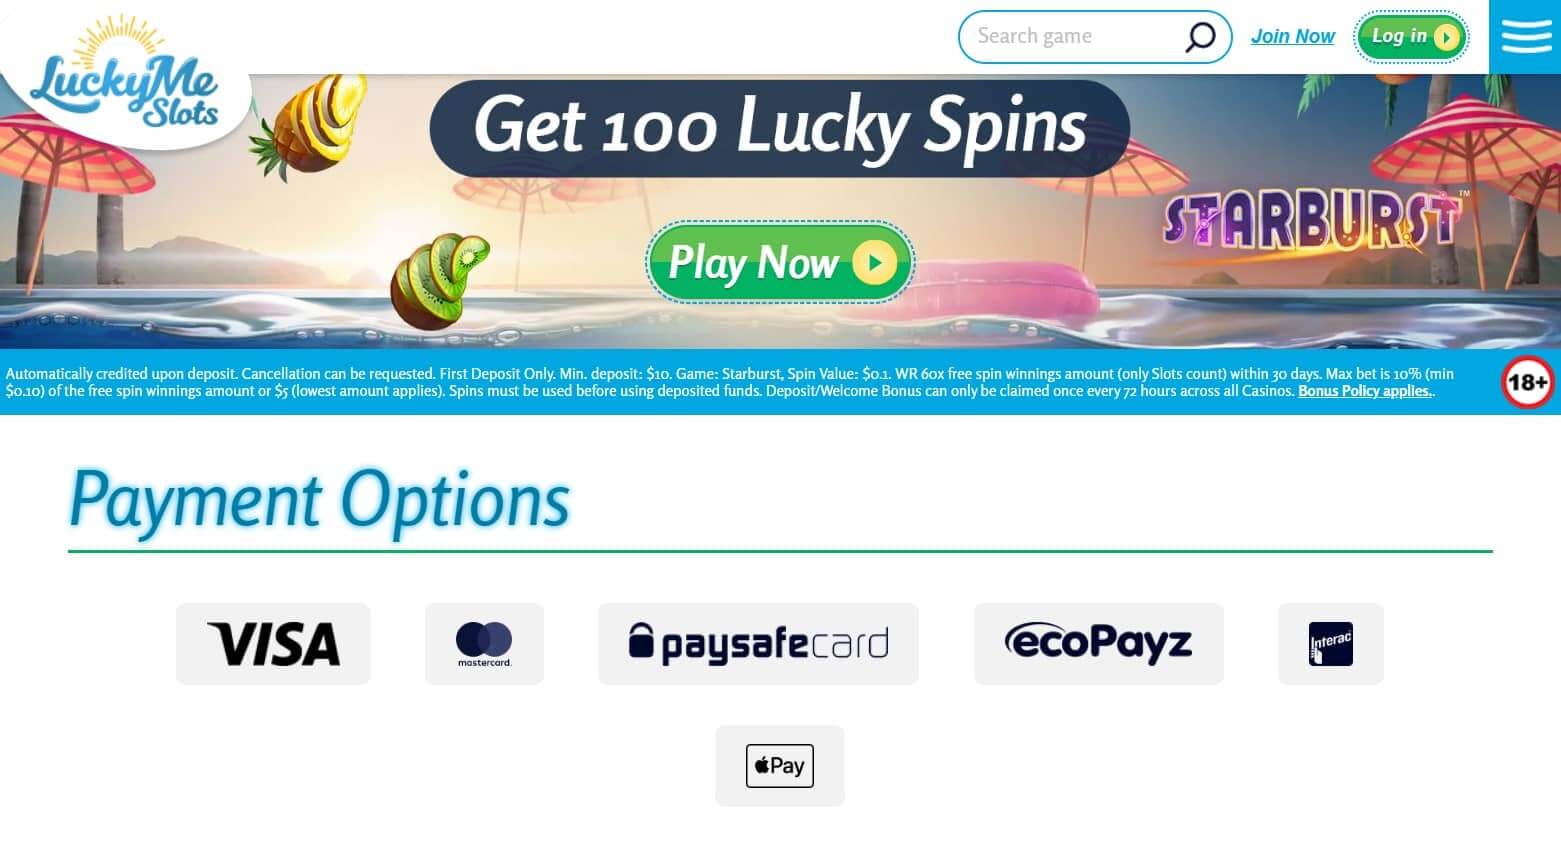 luckyme slots casino payment methods